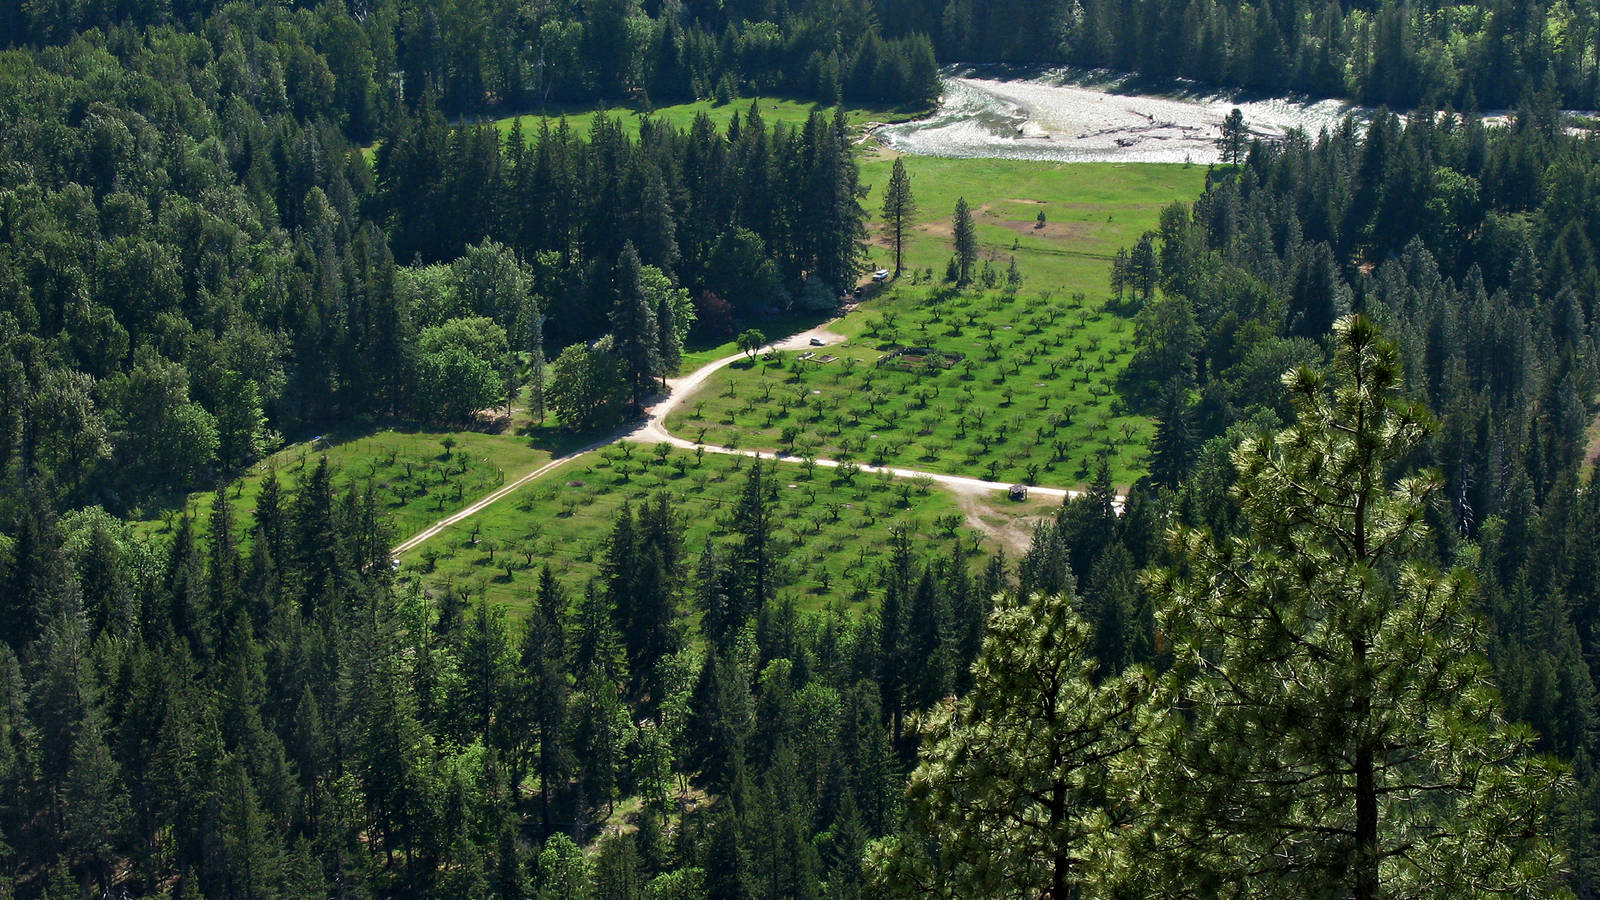 <p>Buckner Orchard in the North Cascades is an irresistible temptation for area wildlife and a challenge for its caretaker. Laurie Thompson relies on a complicated system of fences and gates to keep out elk and bear while allowing summer access to deer. </p>